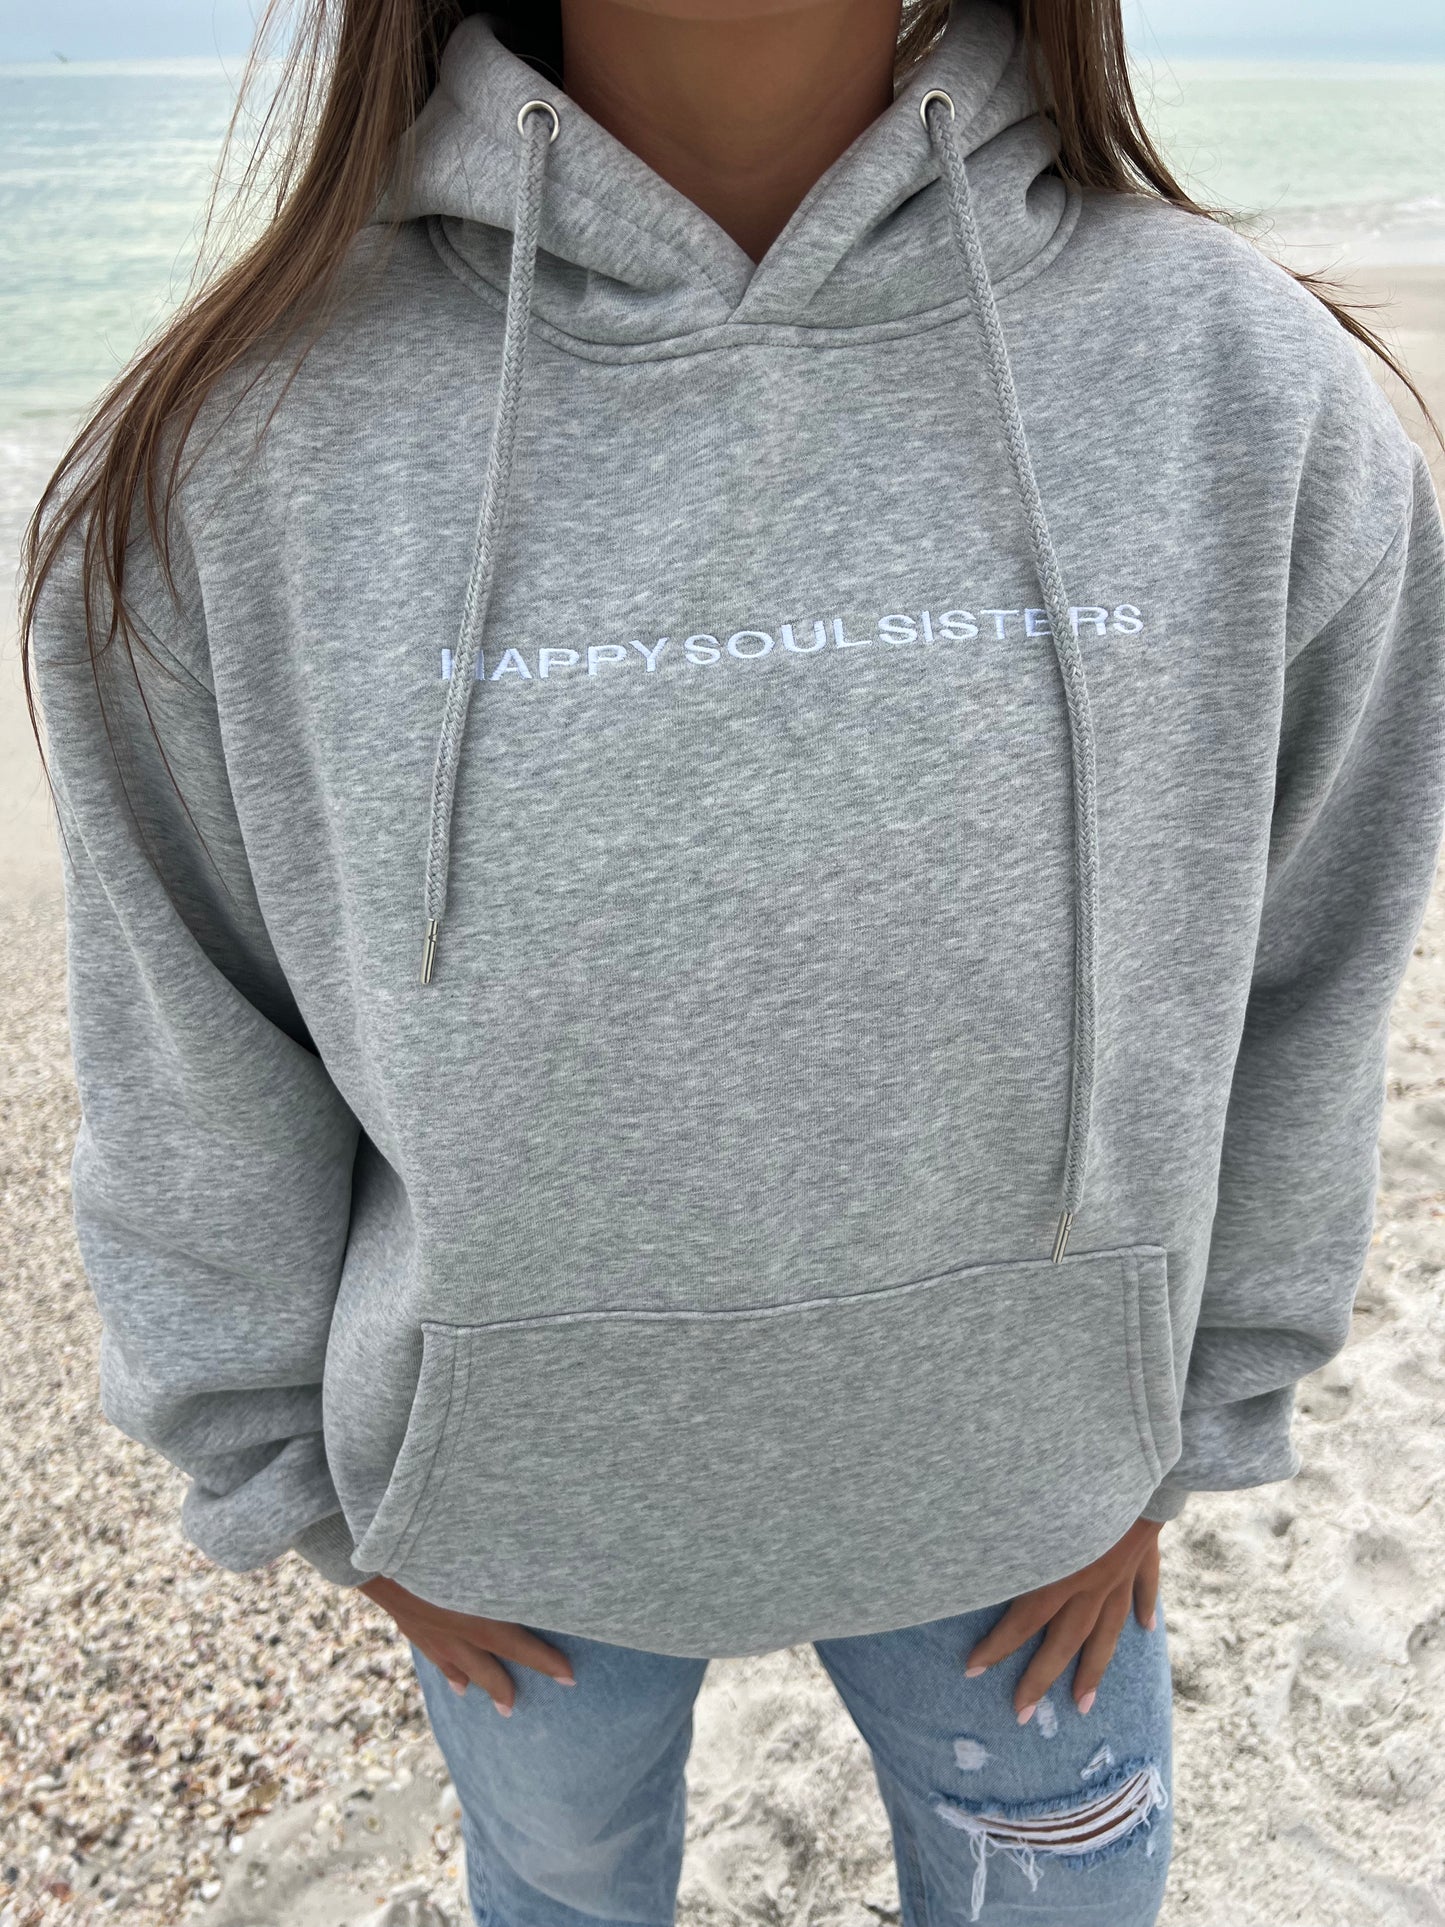 The Signature Happy Soul Sisters Hoodie